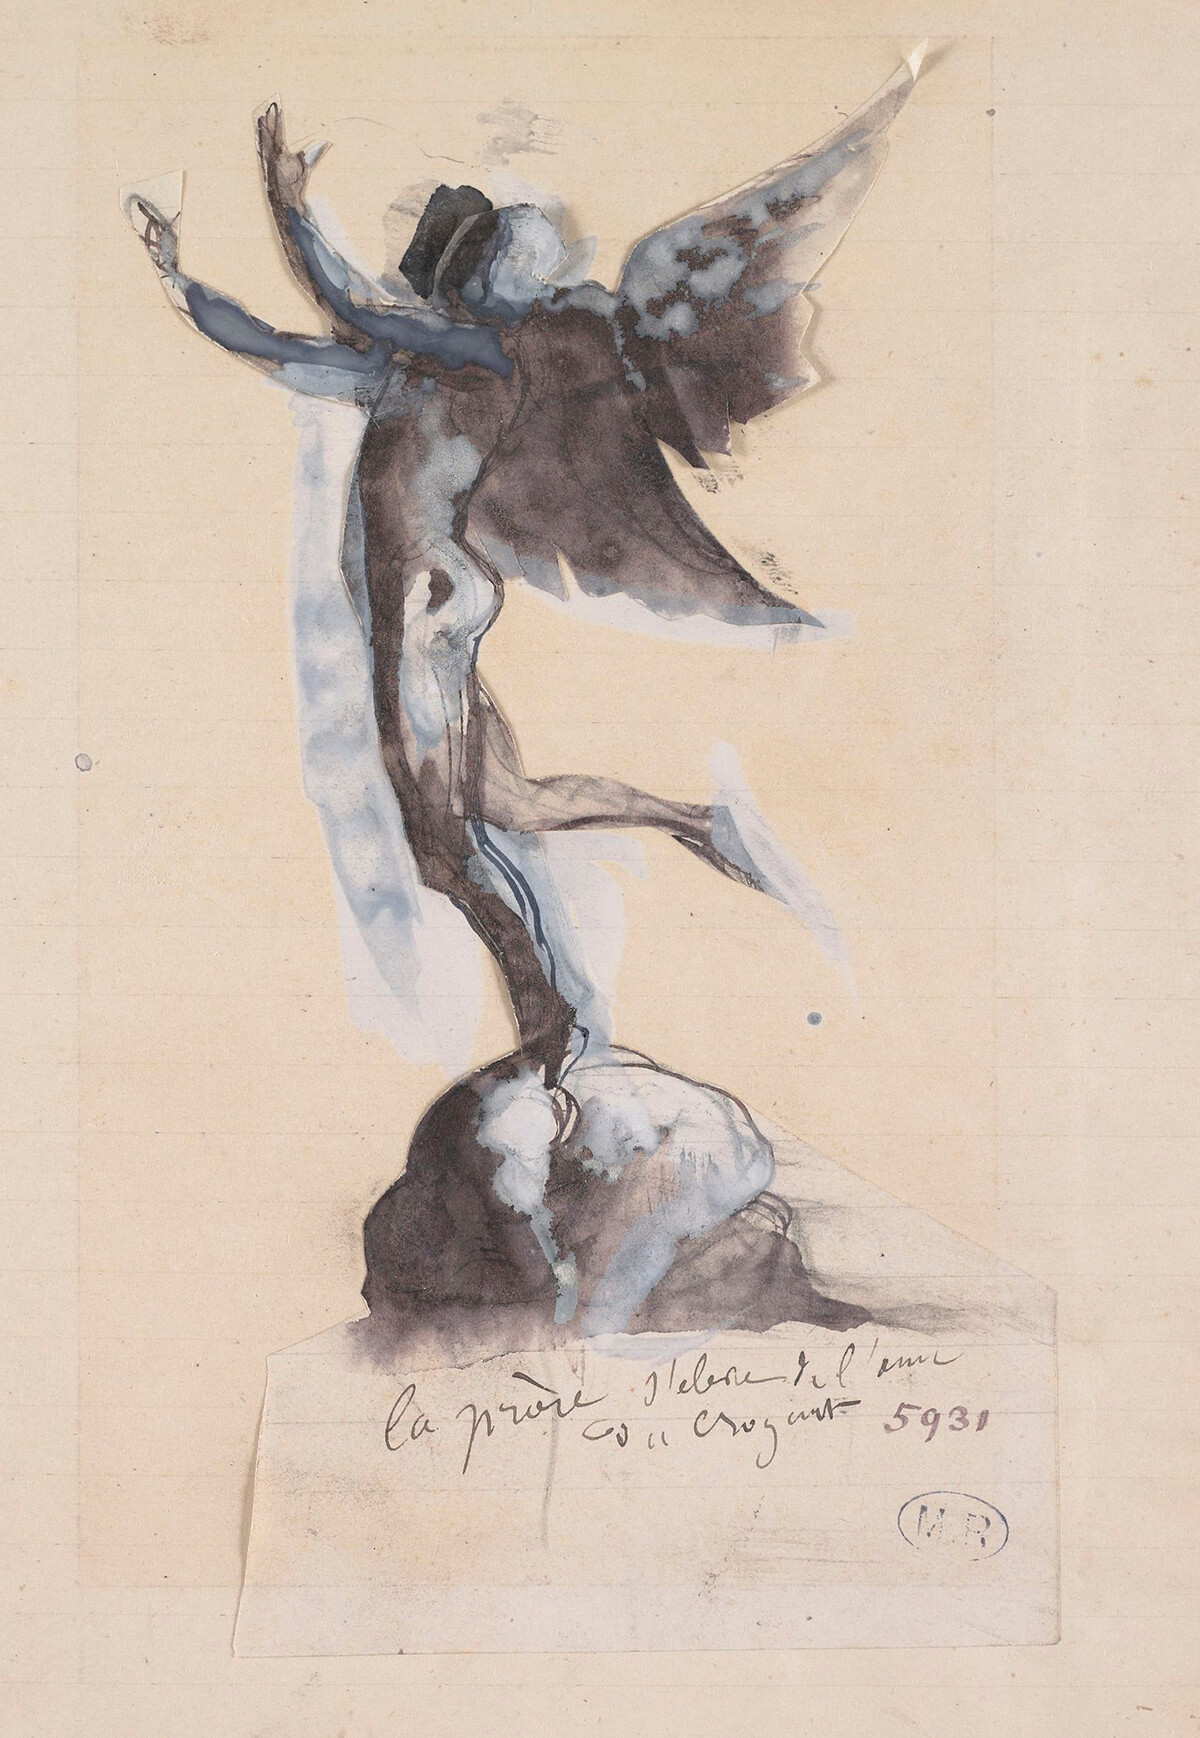 Sculptural painting of a winged figure standing on a stone with arms reaching upwards by artist Rodin